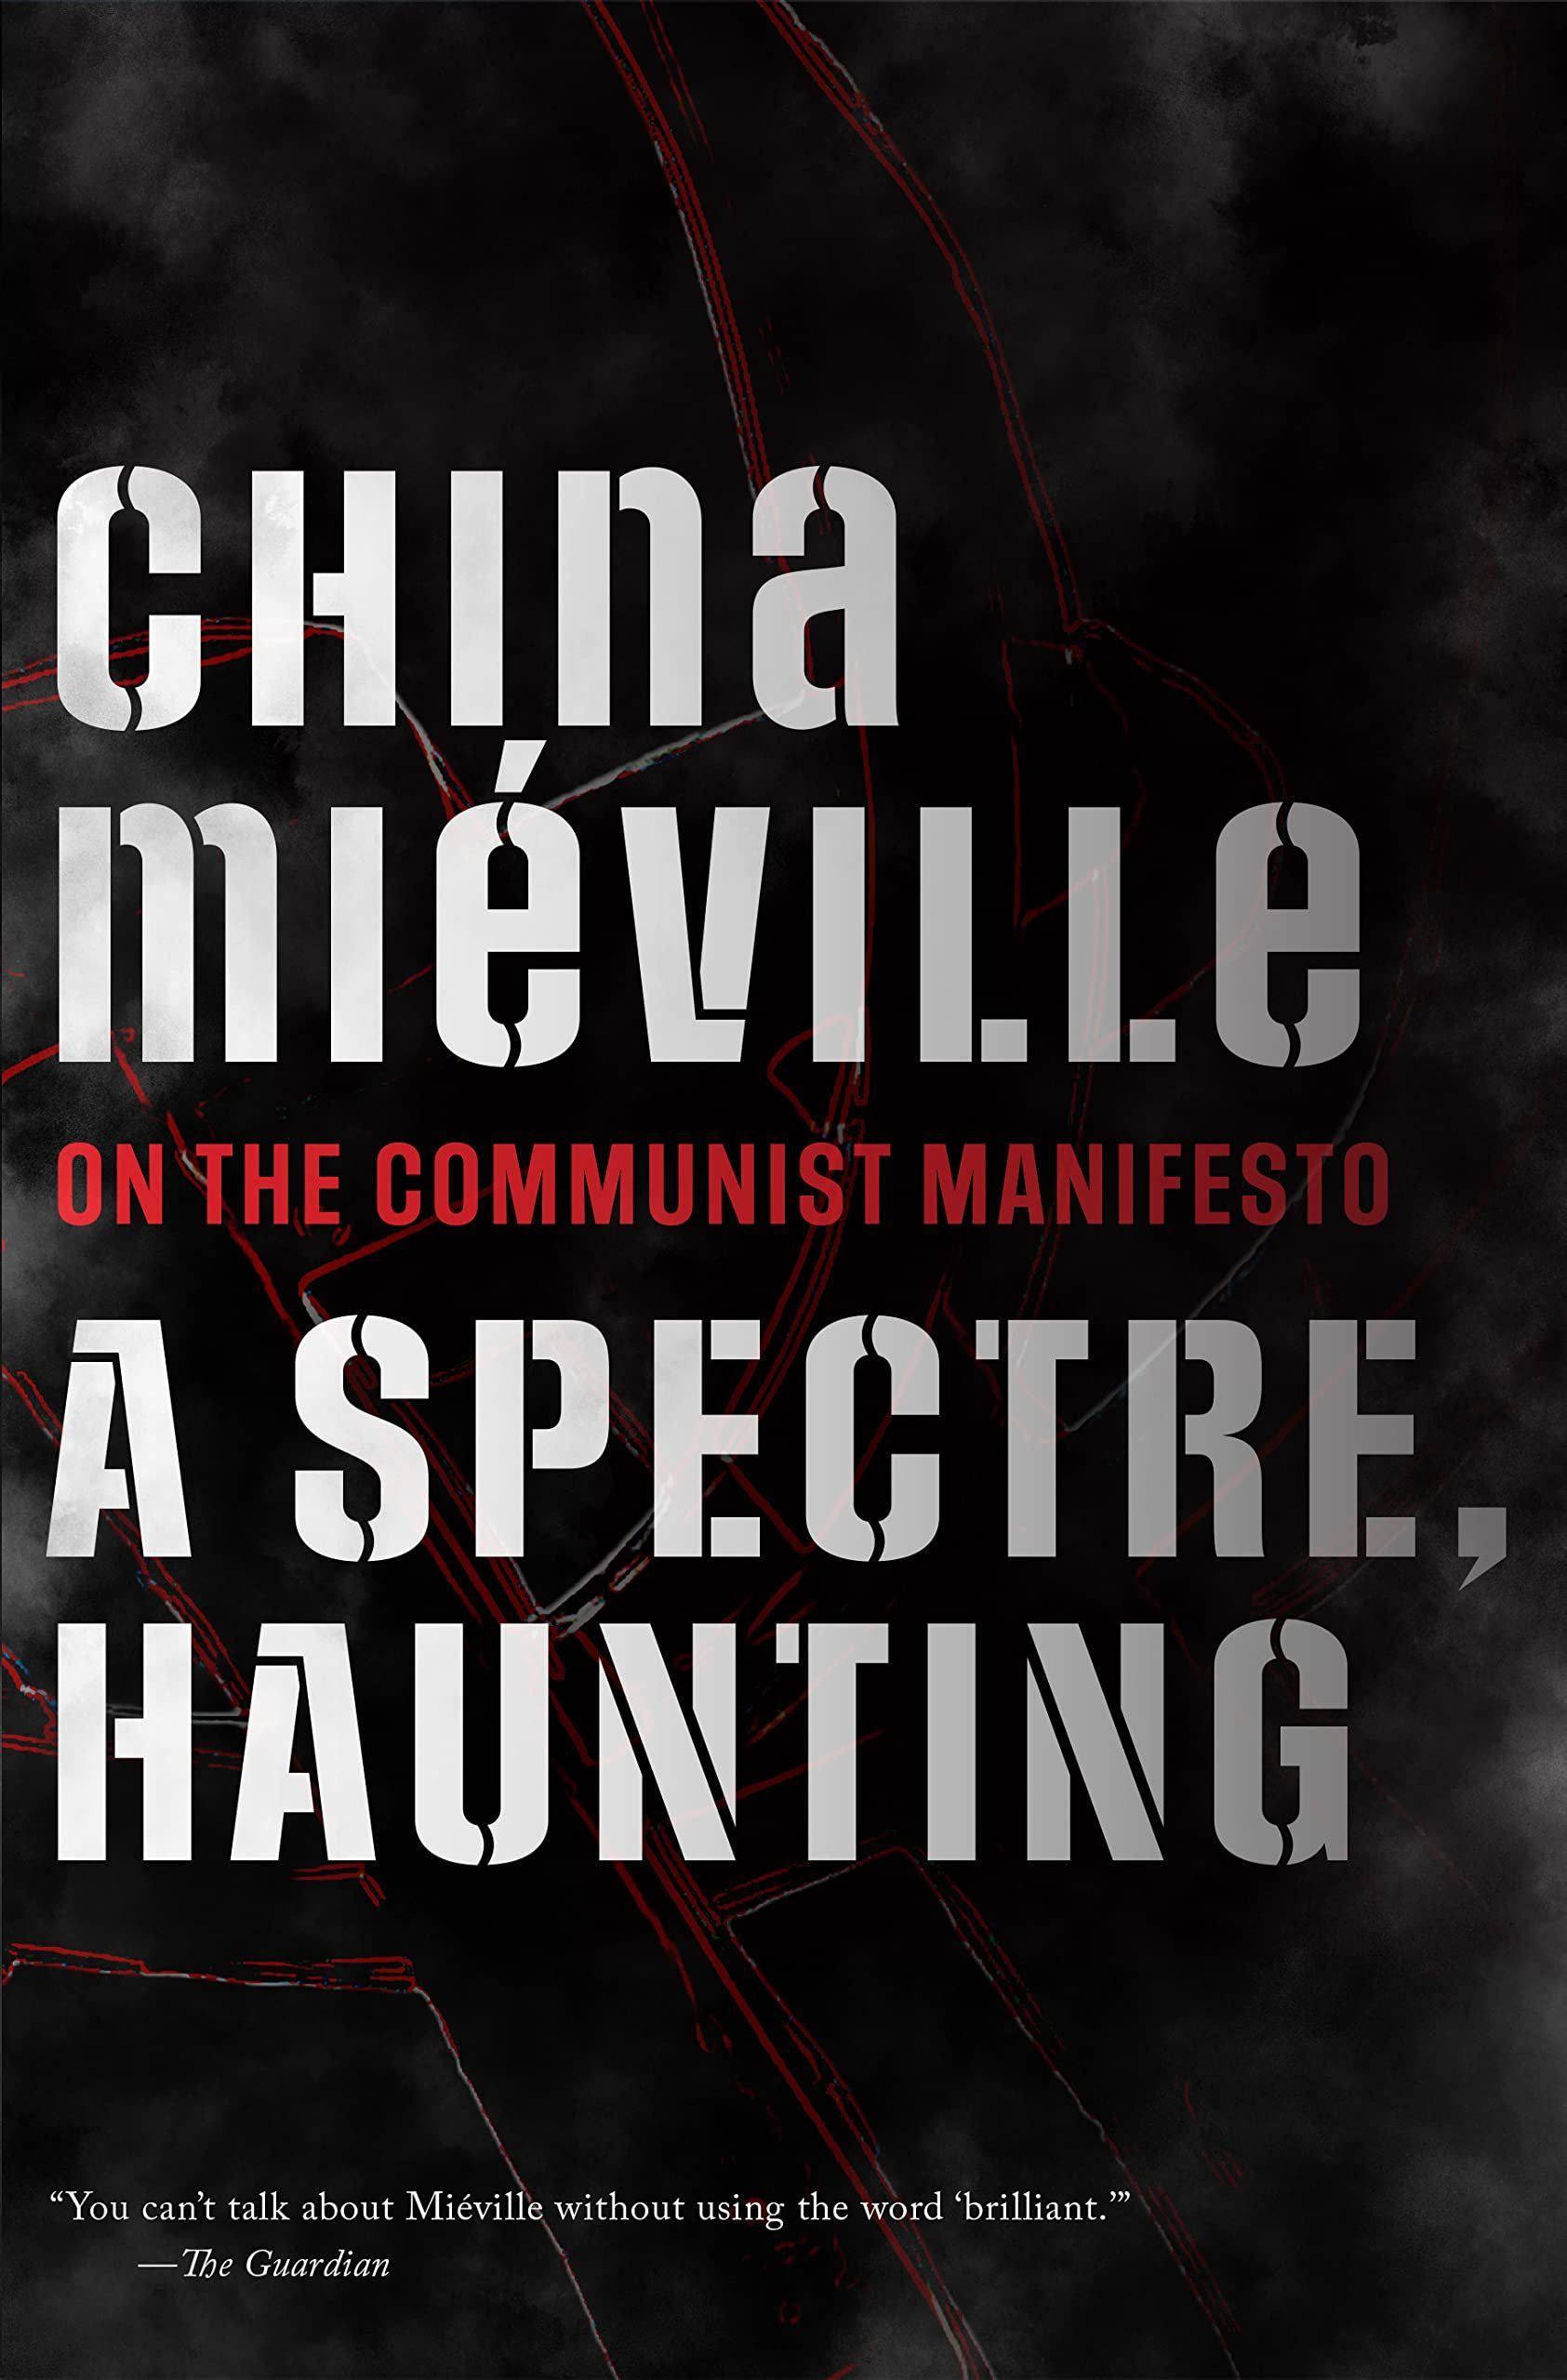 A Revolutionary Hate to Salvage Utopian Love: On China Miéville’s “A Spectre, Haunting”